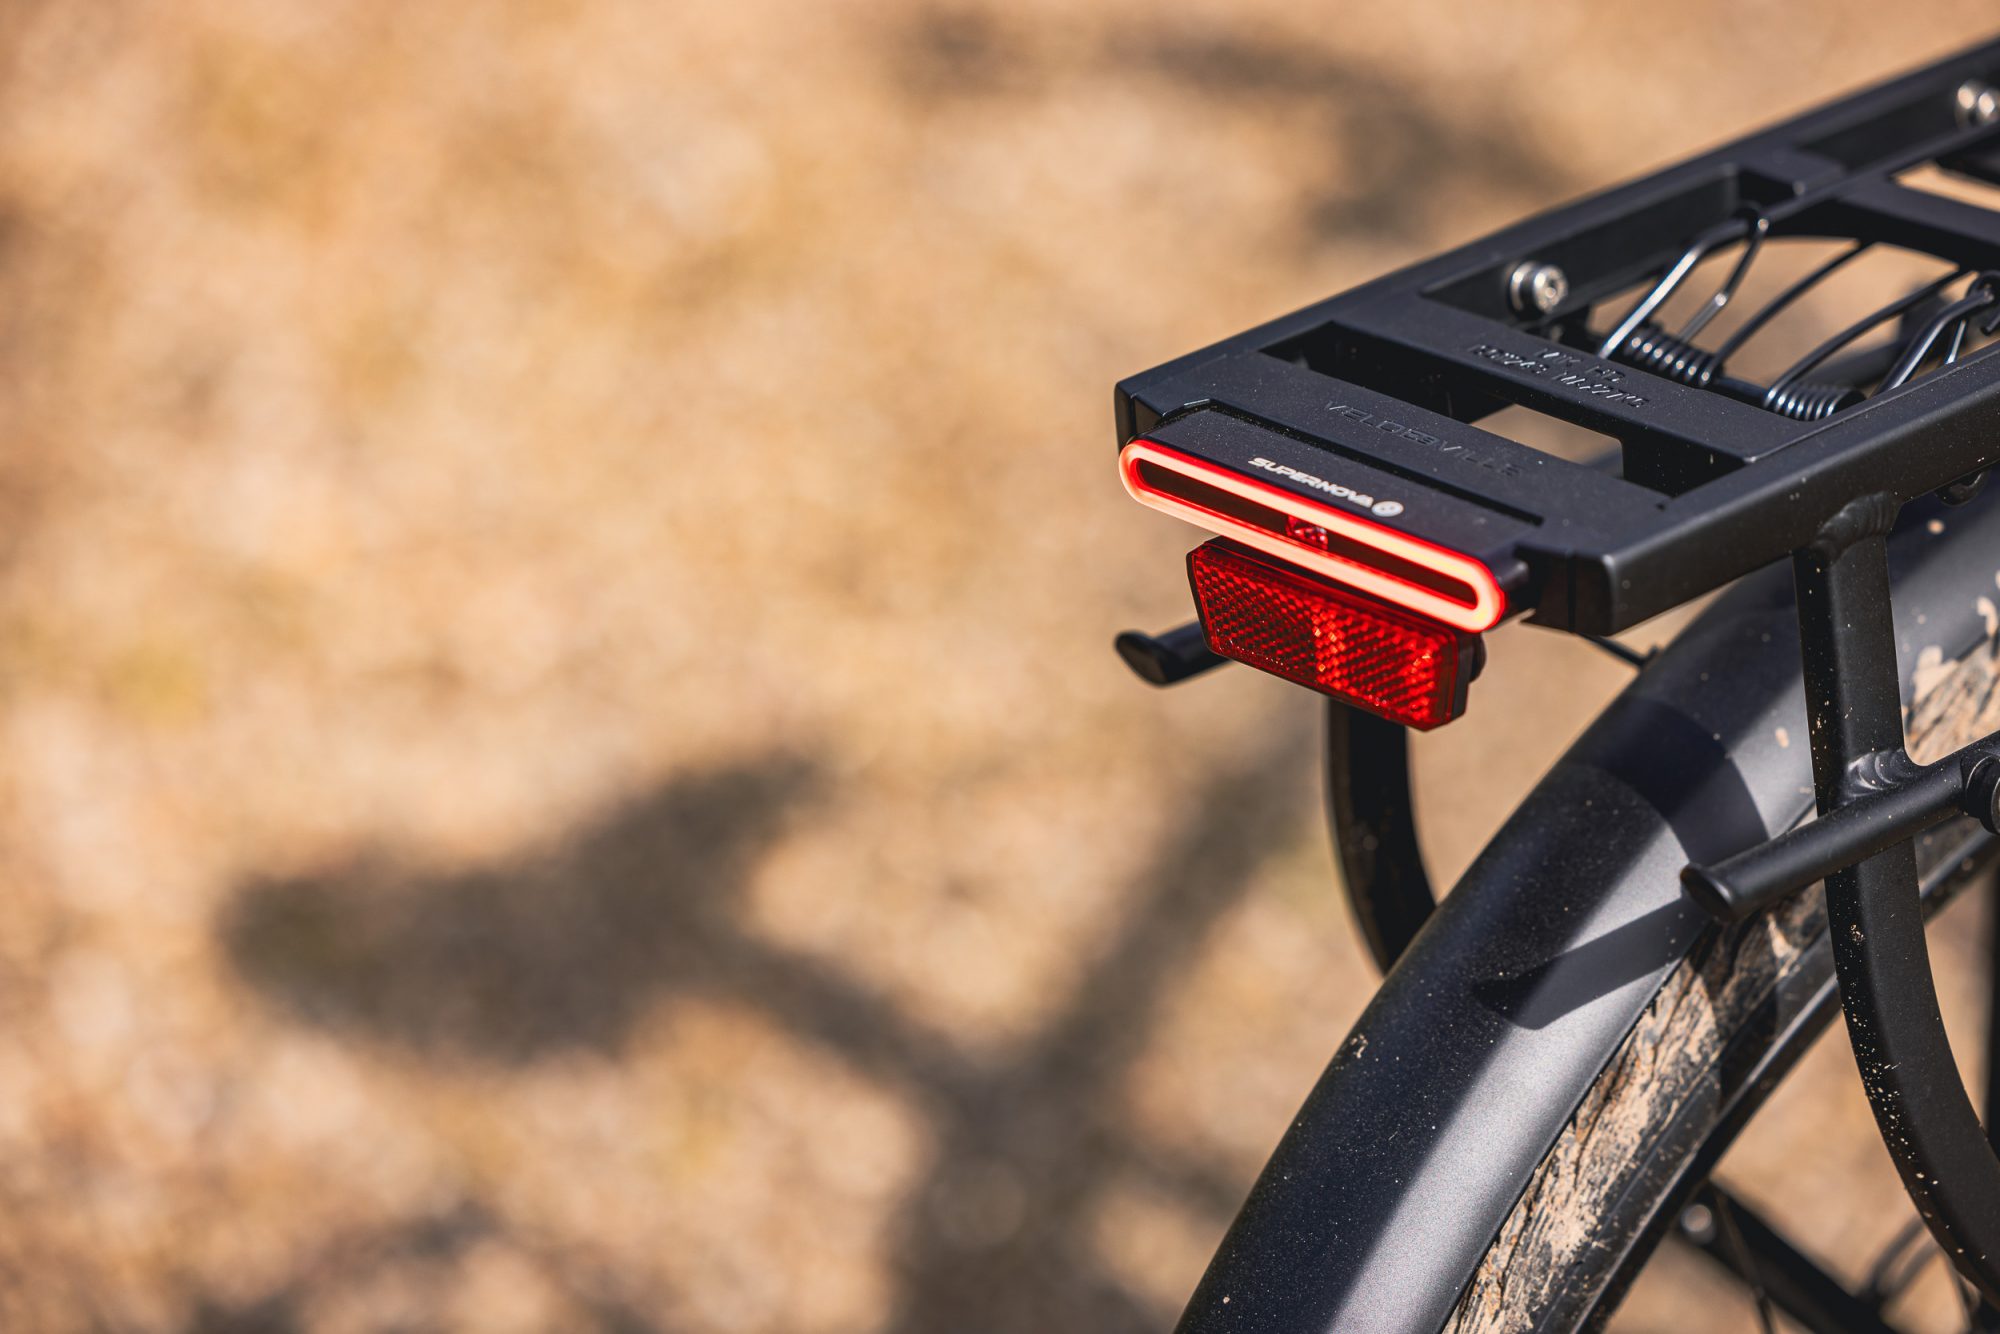 Individuality plays a major role at velo de ville. That's why you can choose almost every part of the bike according to your wishes. How about a super stylish rear light from supernova?